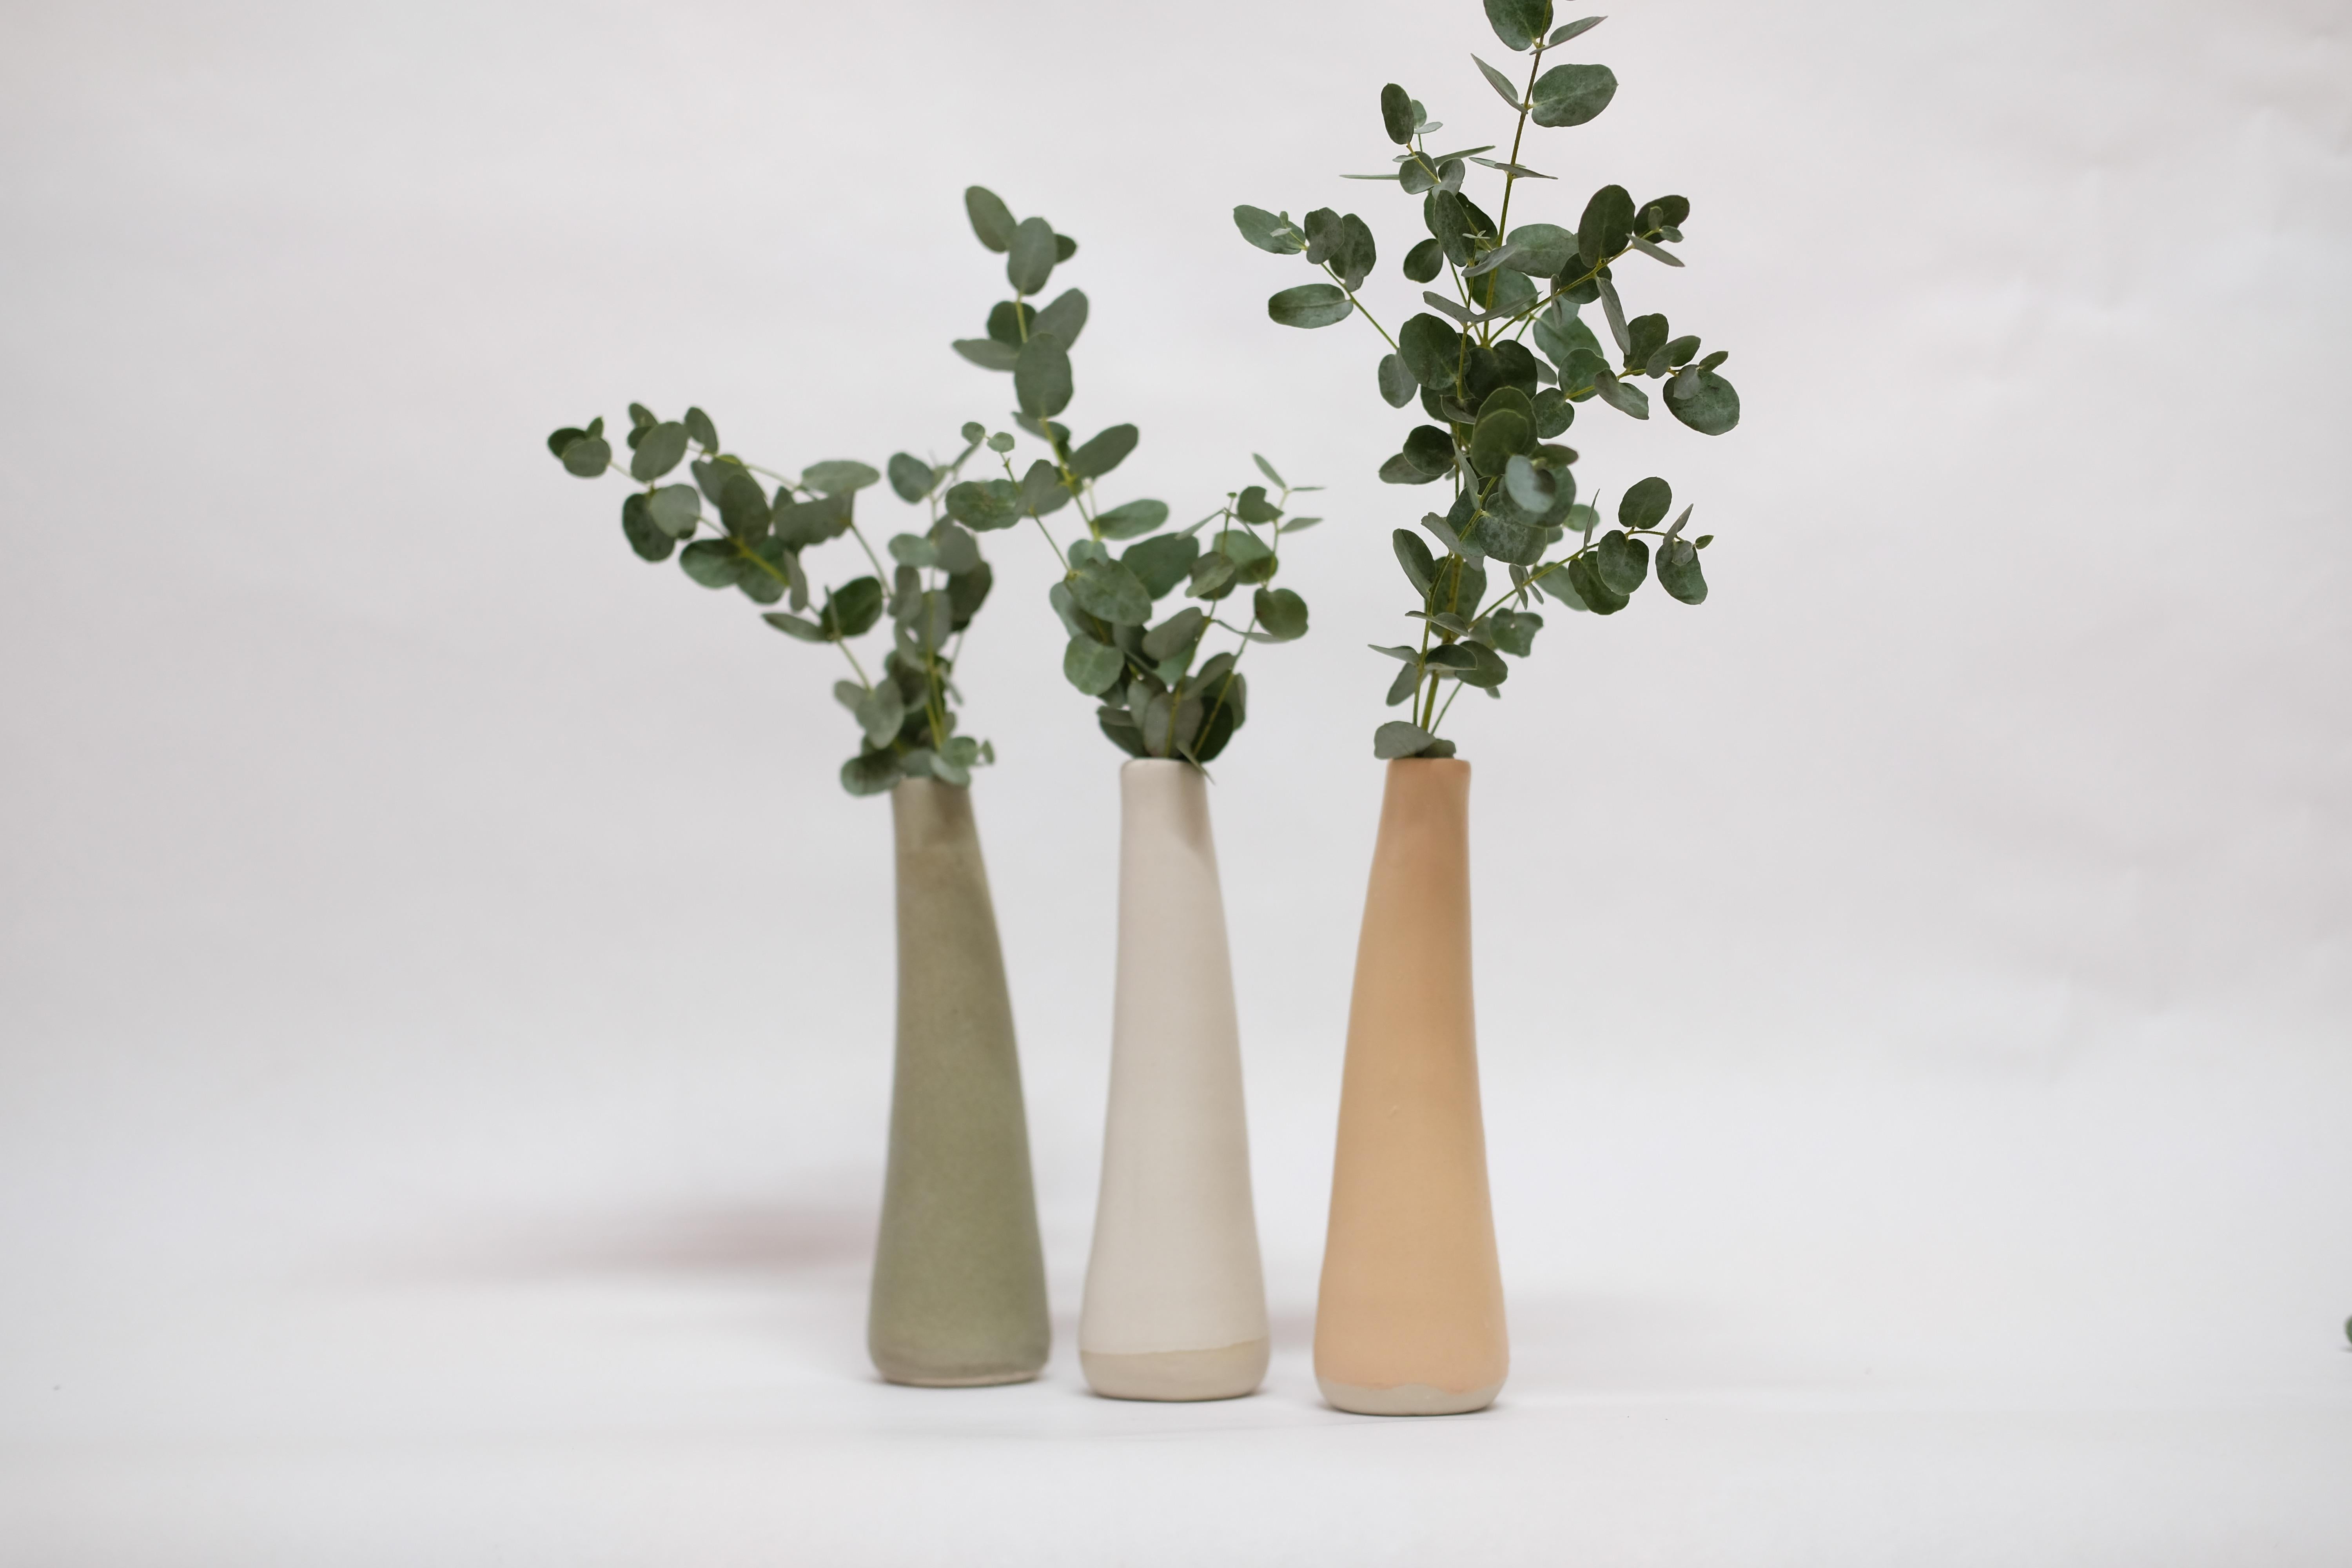 Set of 3 Solitario stoneware vases by Camila Apaez
One of a kind
Materials: Stoneware
Dimensions: 7 x 7 x 19 cm
Options: White bone, stone sage, artichoke green (while supplies last), buttermilk.
This year has been shaped by the topographies of